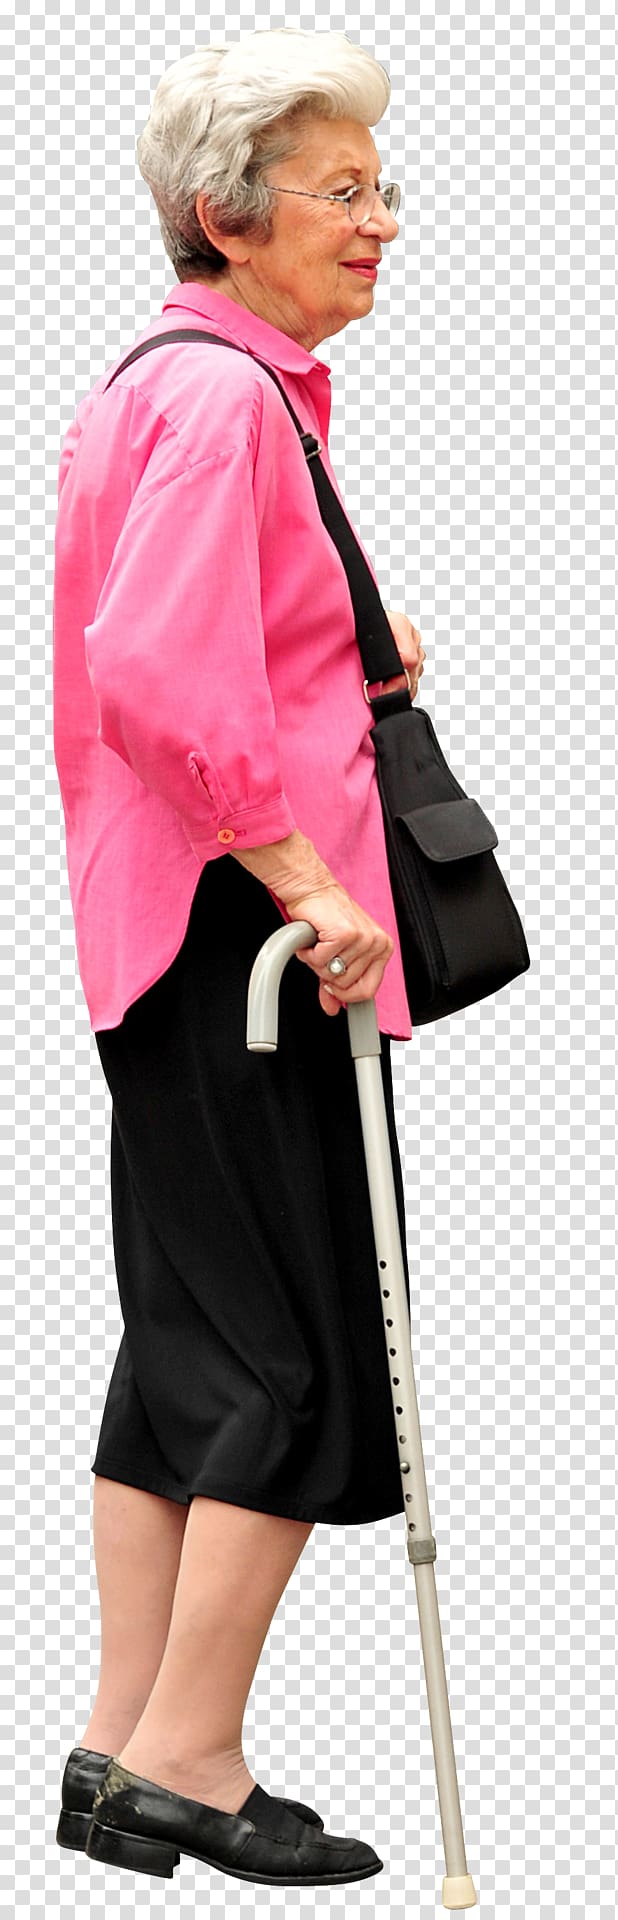 woman in pink dress shirt and black midi skirts holding white adult cane, Architectural rendering Walking Architecture, old people transparent background PNG clipart